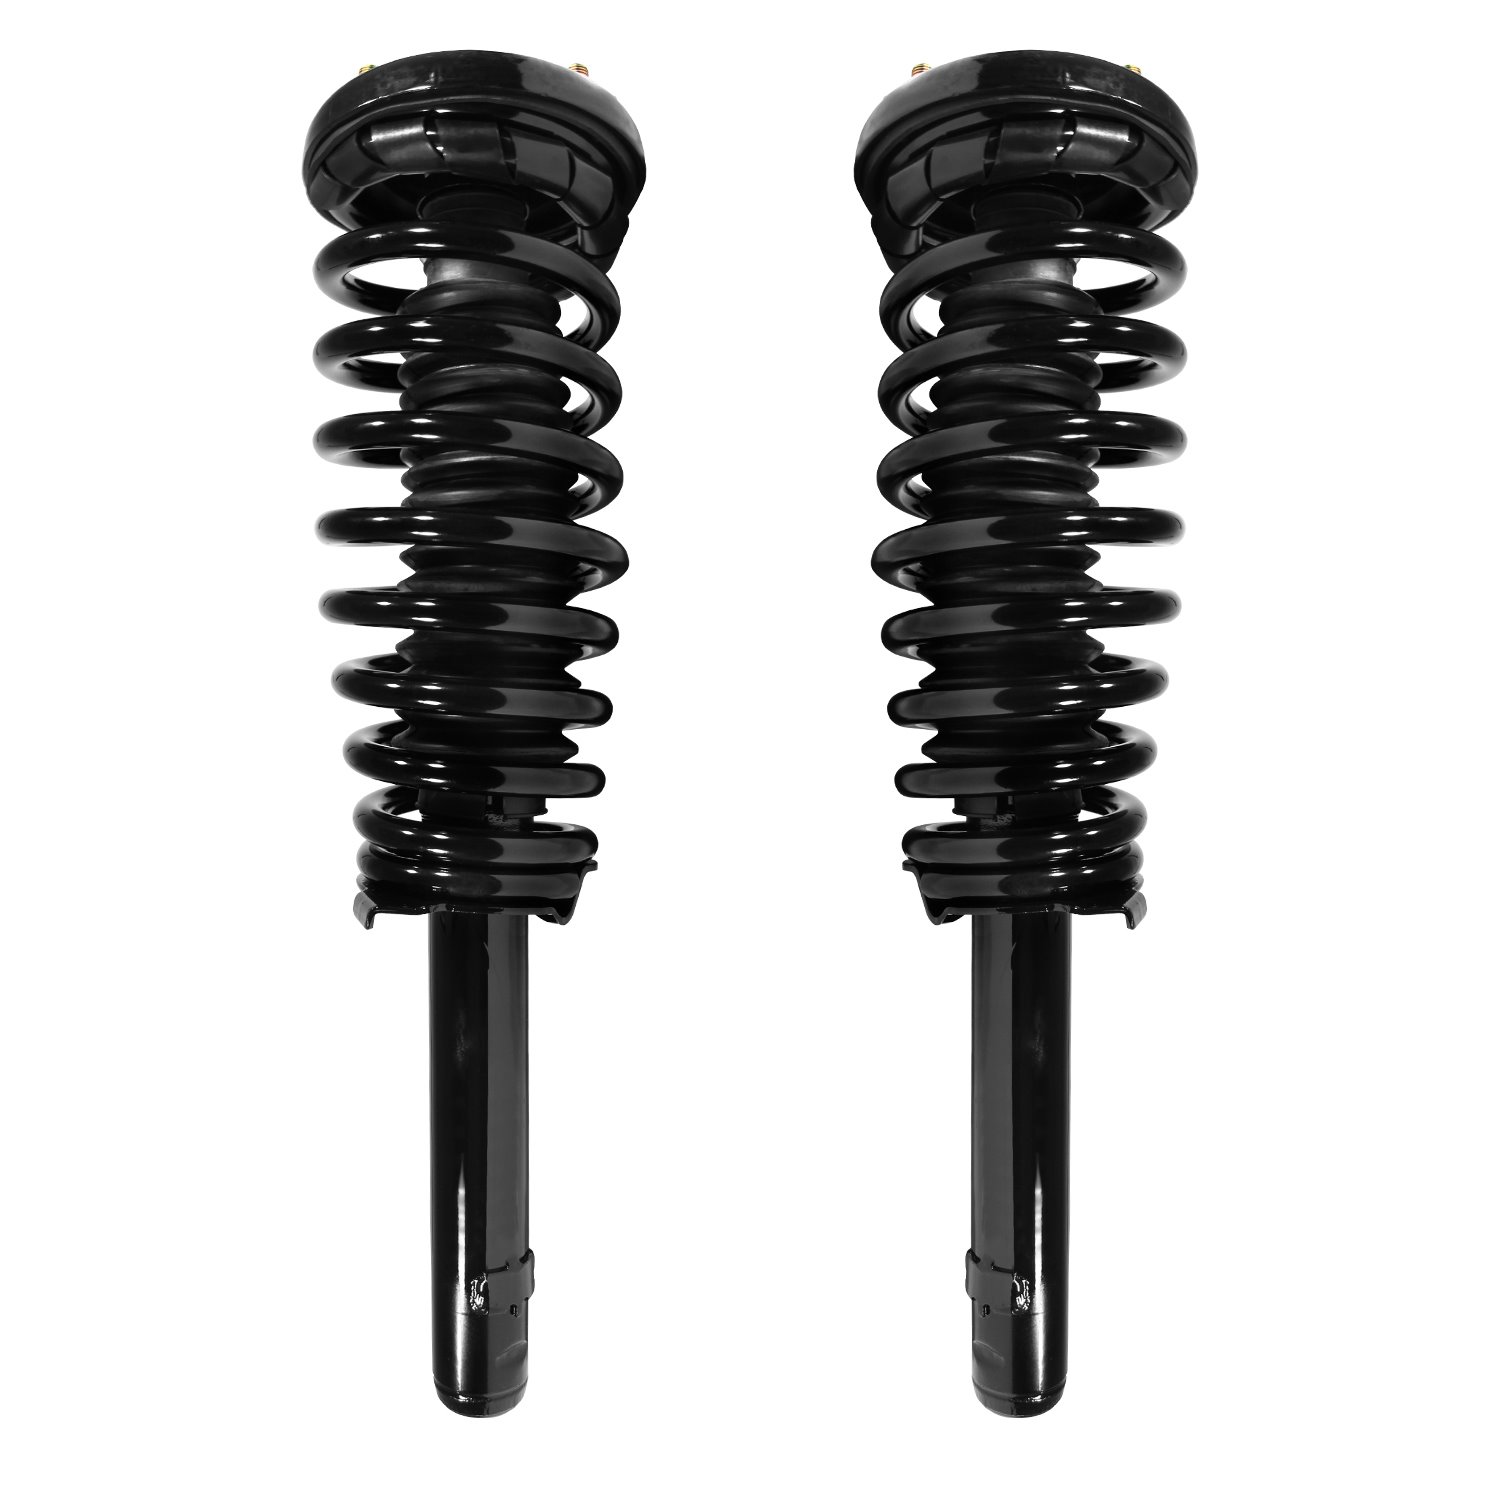 2-11091-11092-001 Suspension Strut & Coil Spring Assembly Set Fits Select Acura CL, Honda Accord